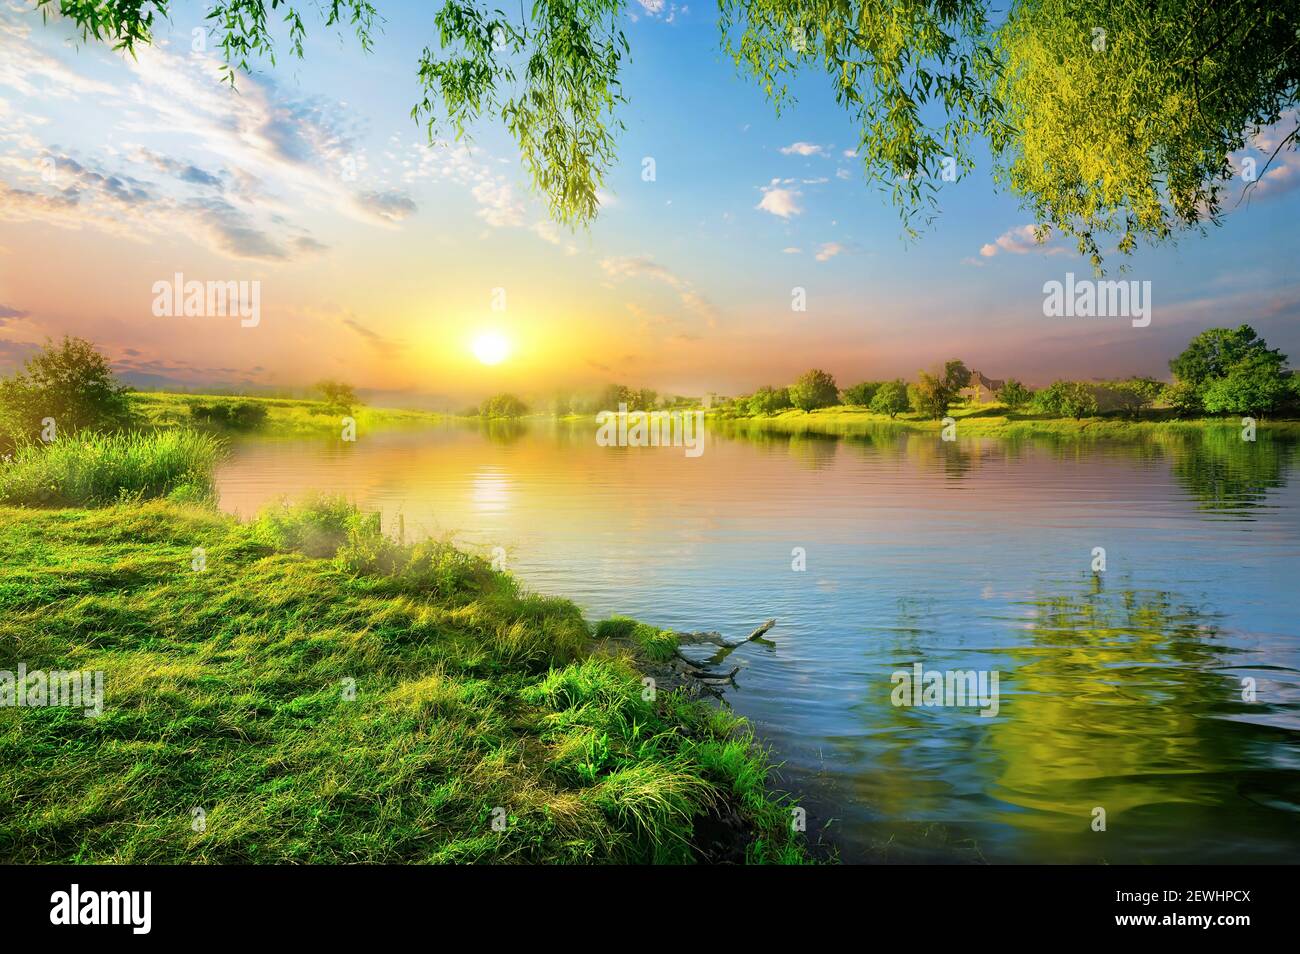 Sunset on a calm river in summer. Stock Photo